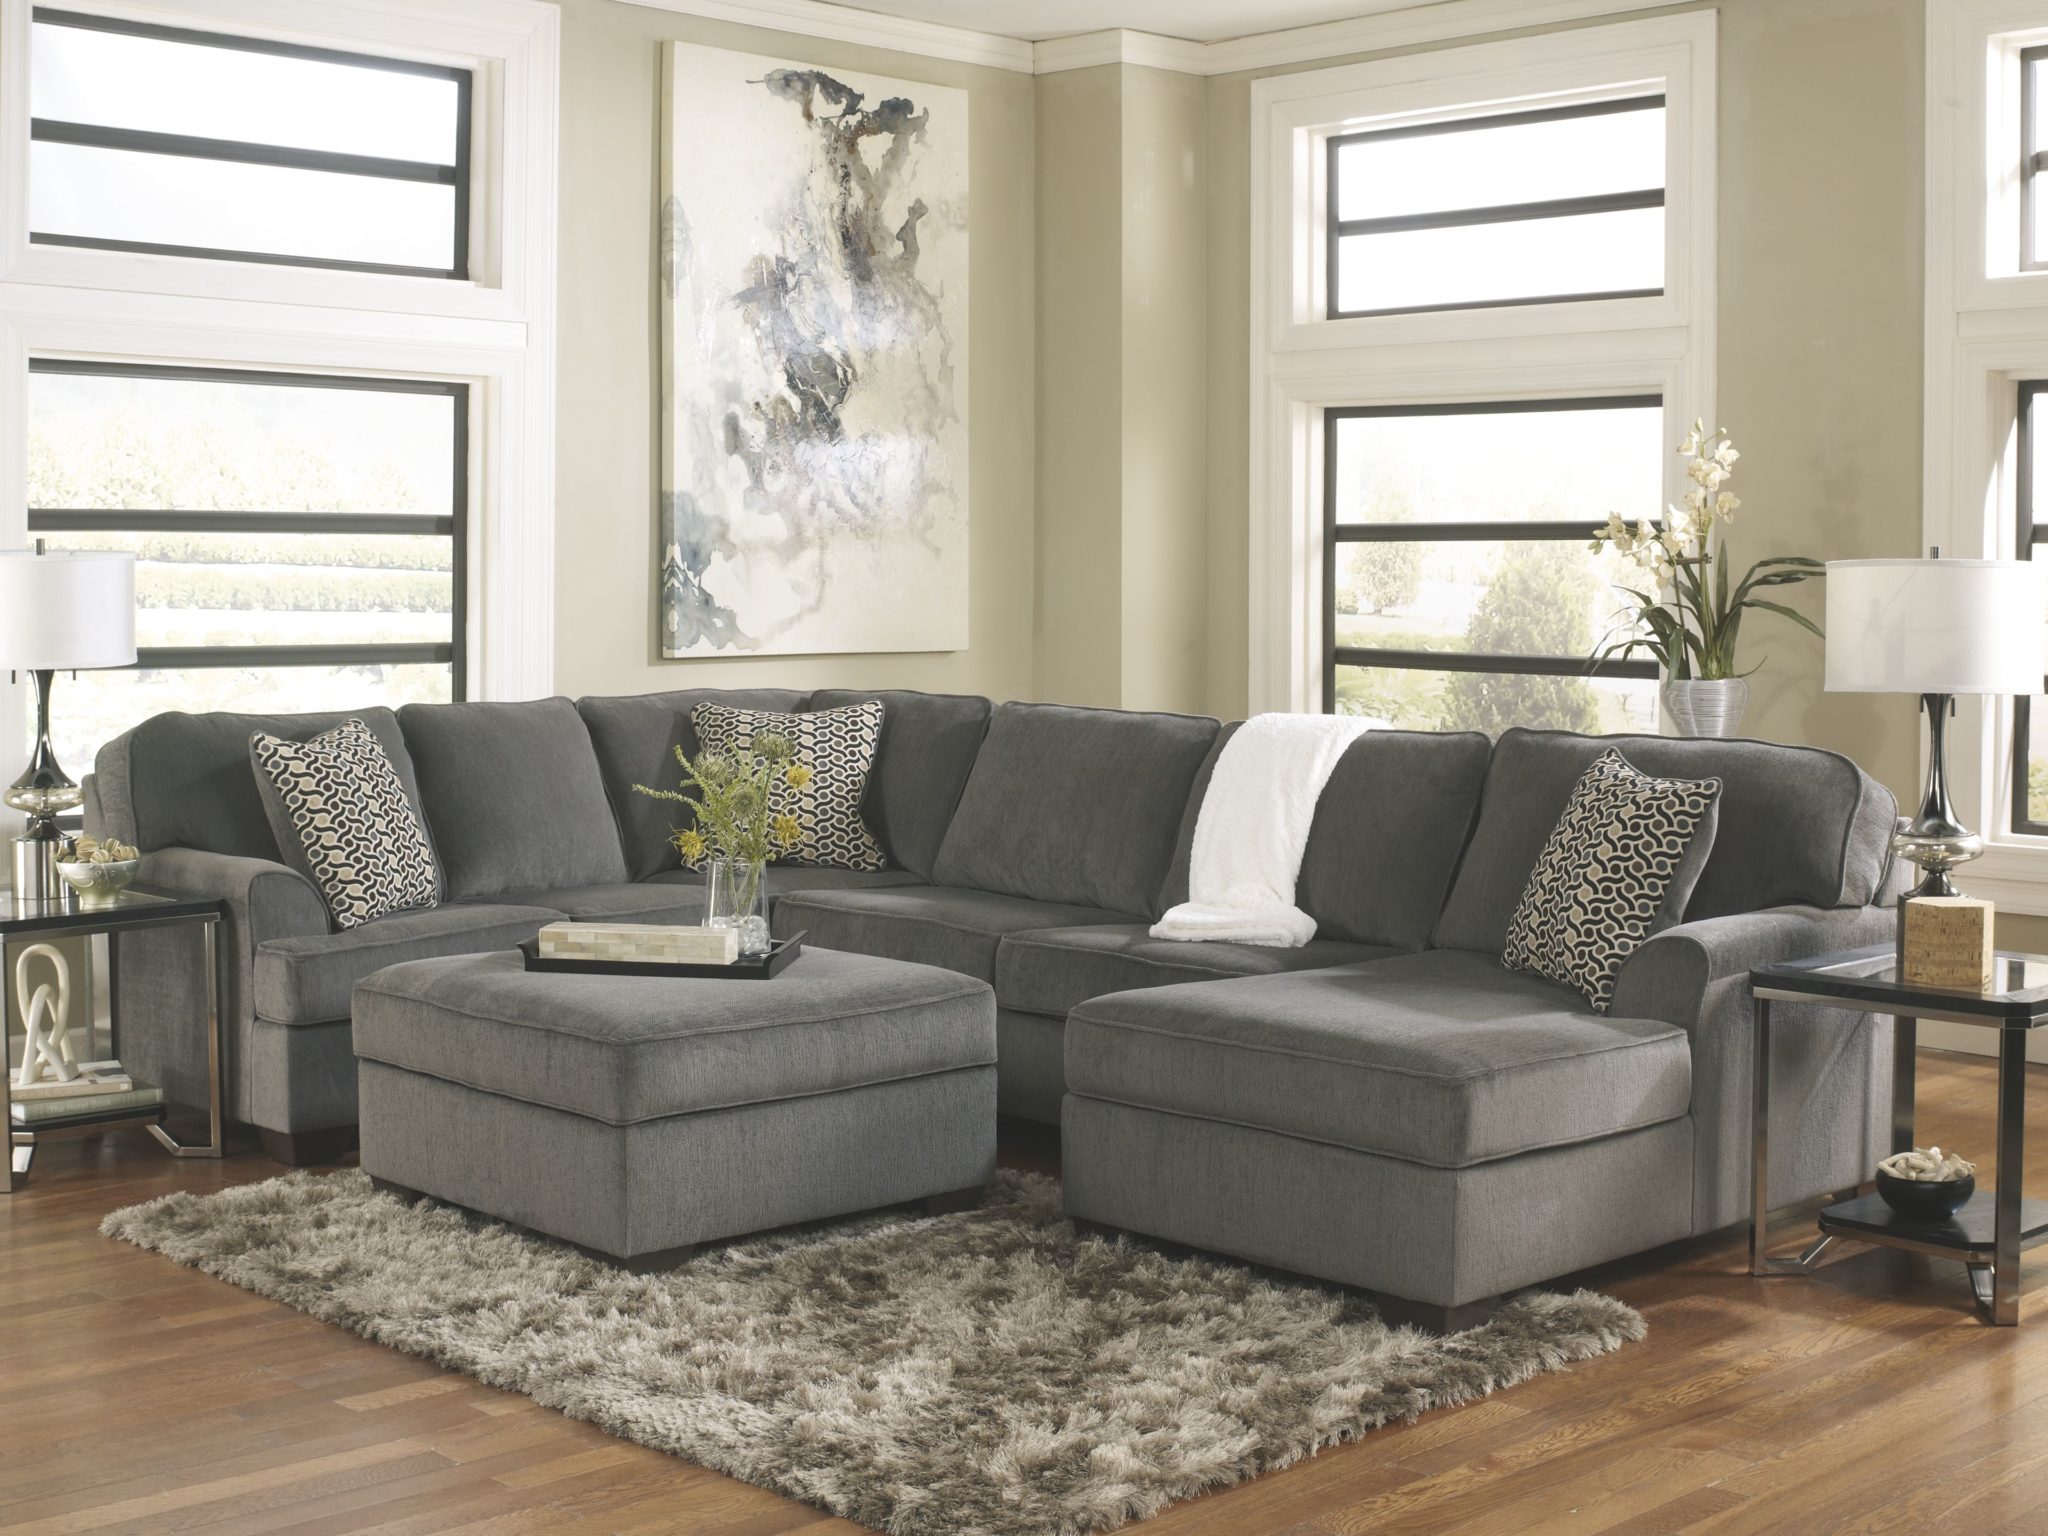 Living Room With Couch And Loveseat